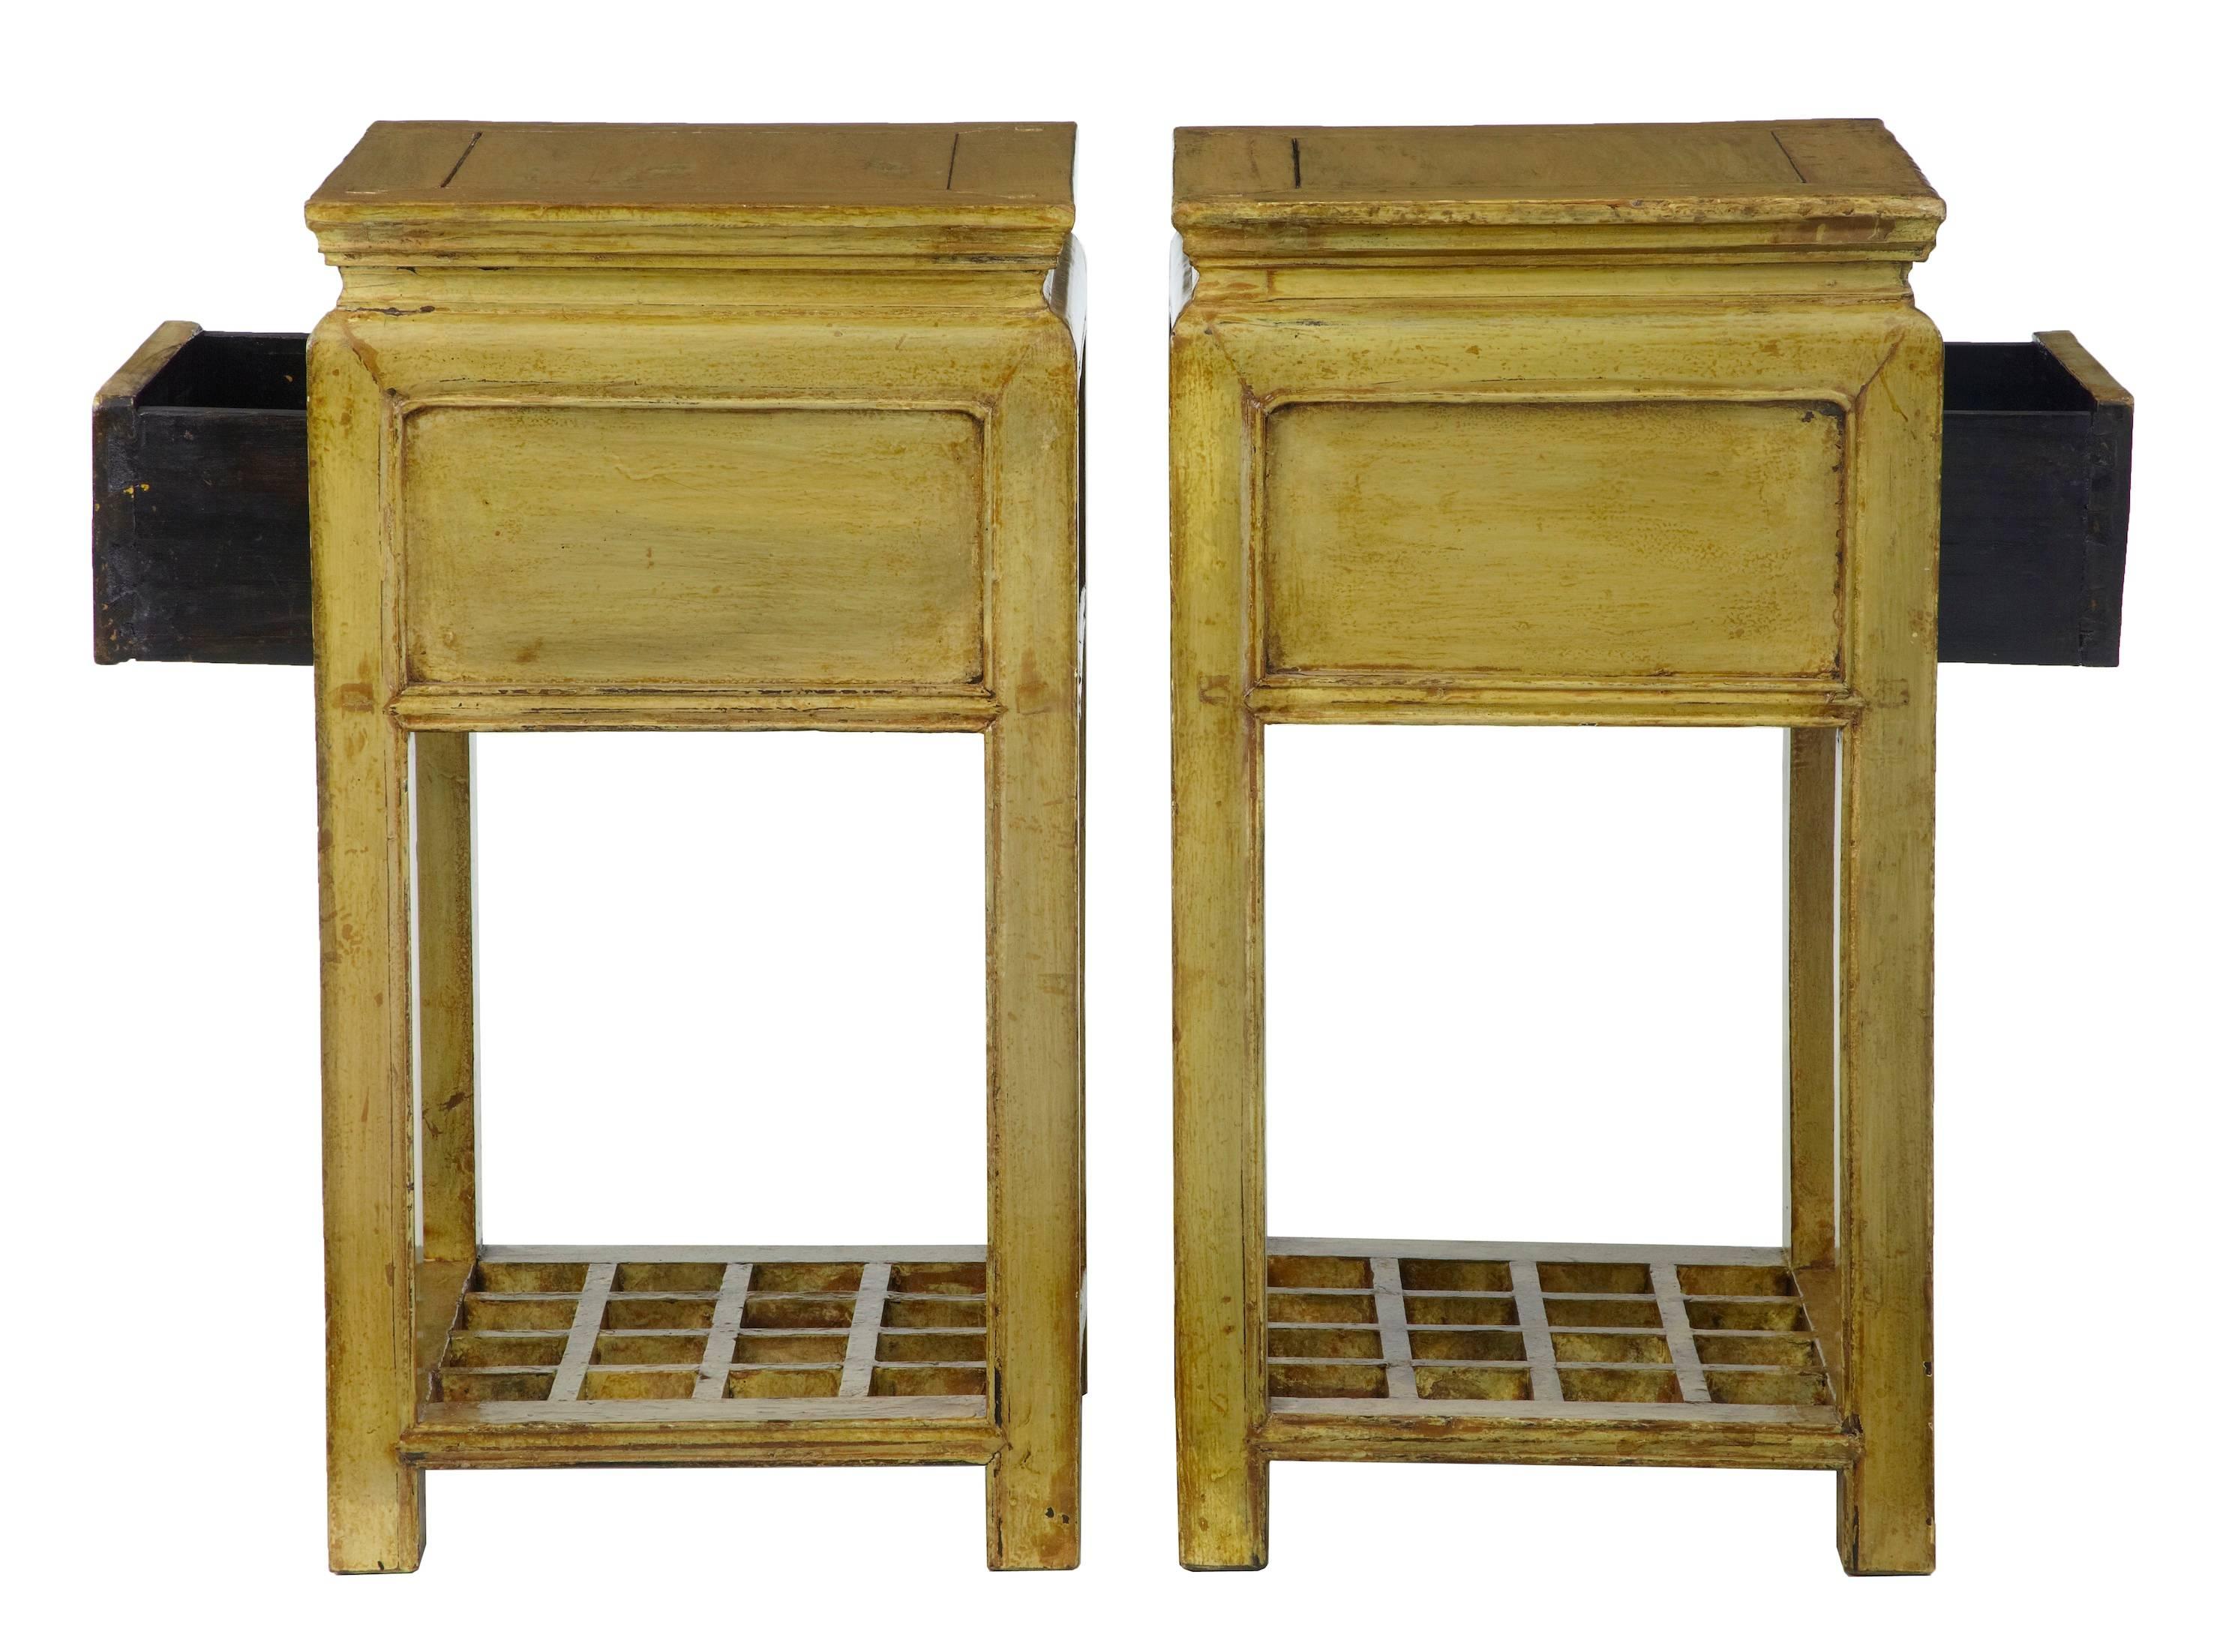 Striking pair of yellow lacquered occasional tables, circa 1890.
Both with single drawer to the front and straight lattice work shelf below.
Some wear and losses to paint below the lacquered surface.
Ideal in the bedroom or living